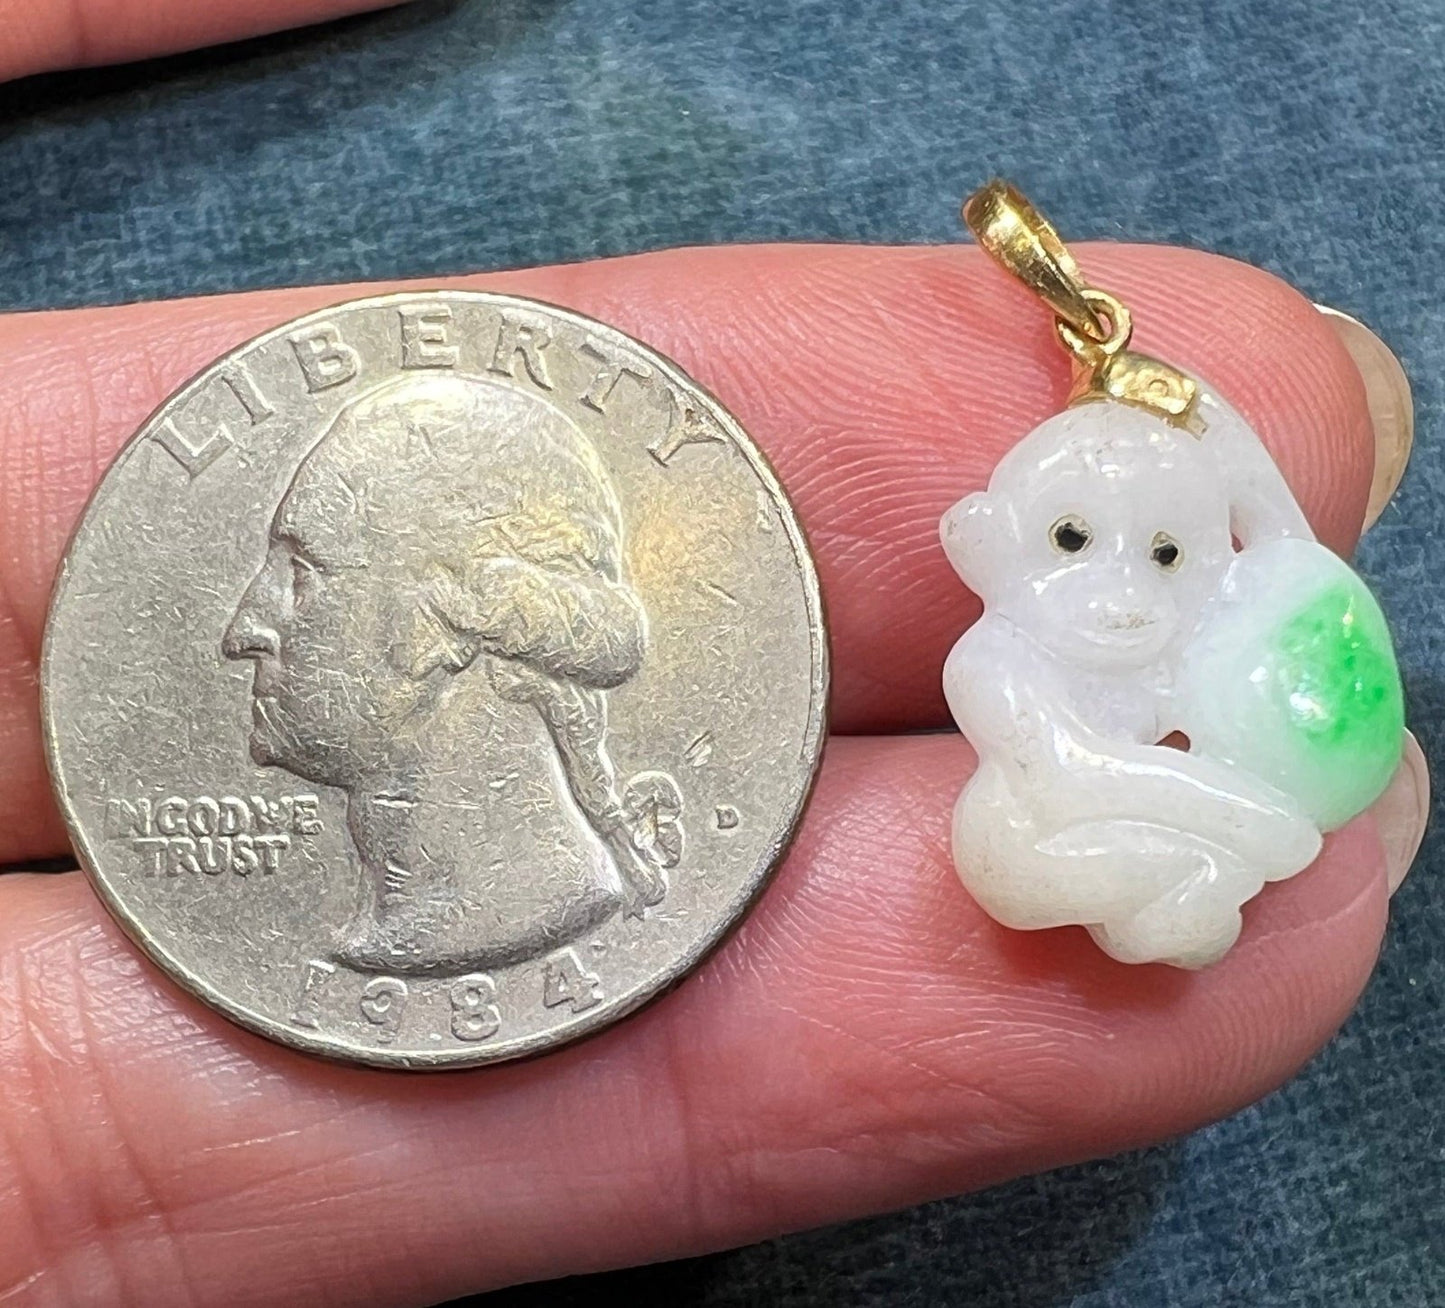 18k Gold Antique Carved Jade Baby Monkey + Peach Pendant. Long Life!